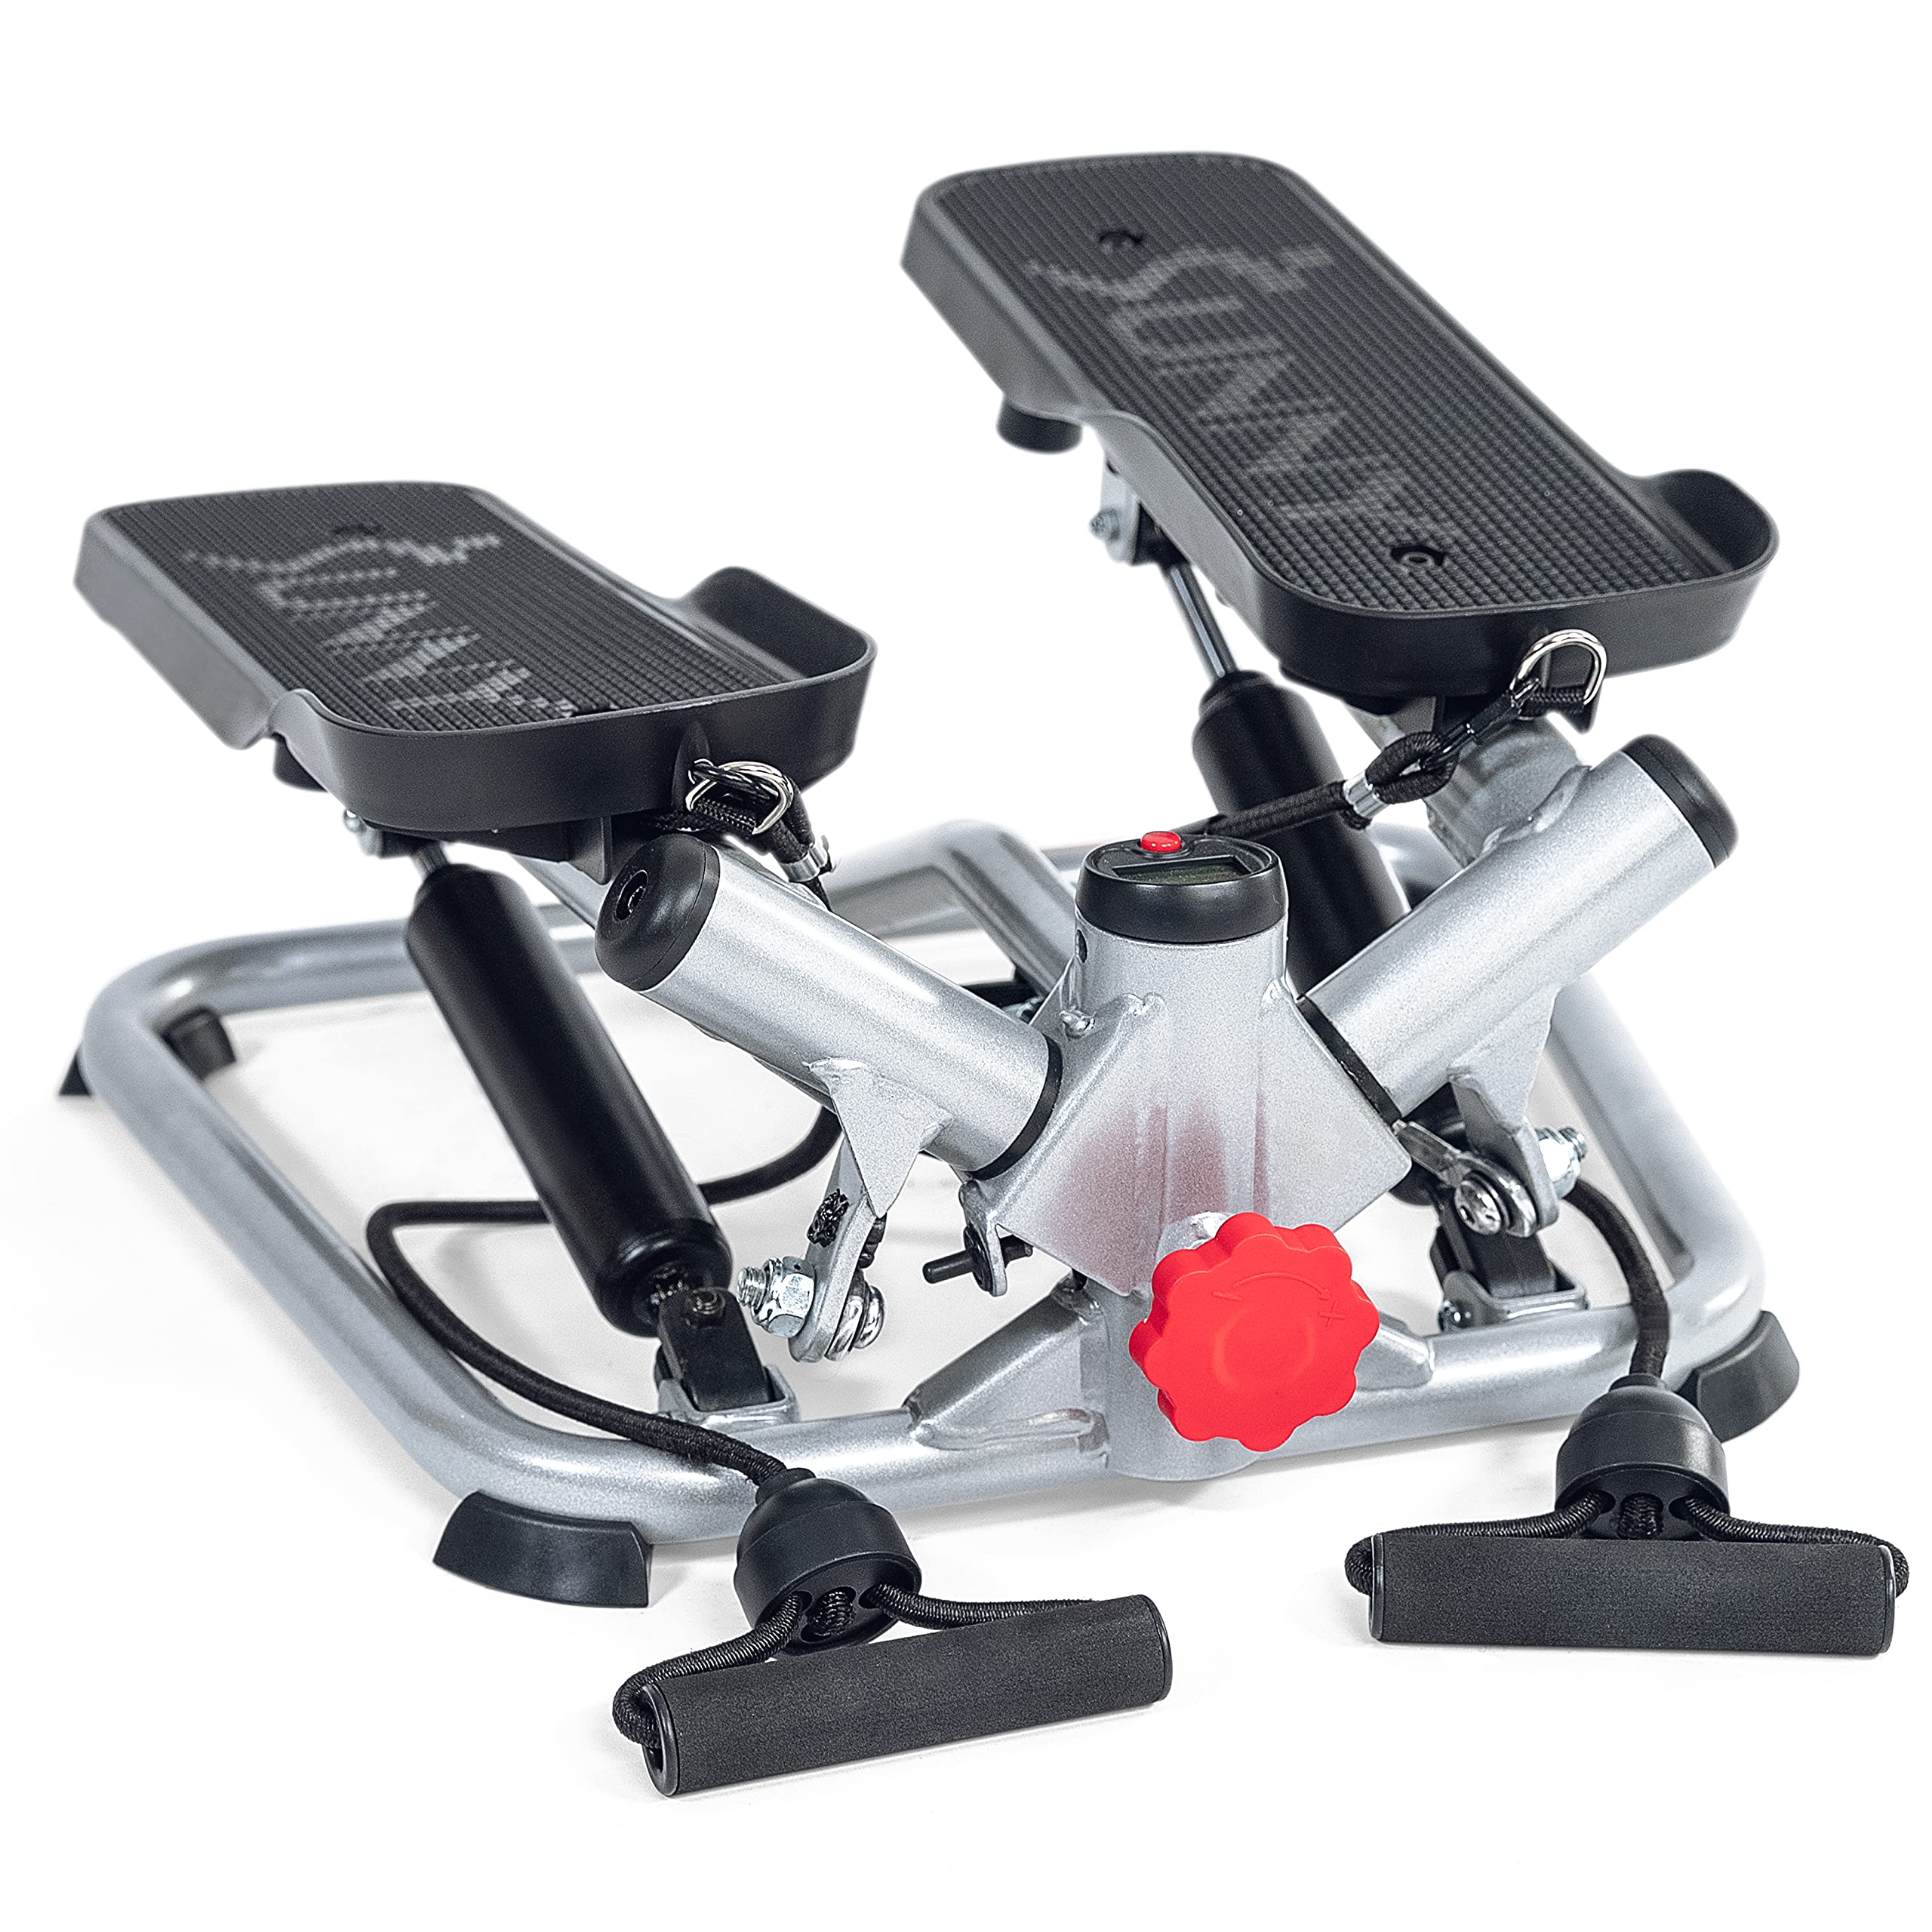 Sunny Health & Fitness Twist Stepper Machine with Resistance Bands